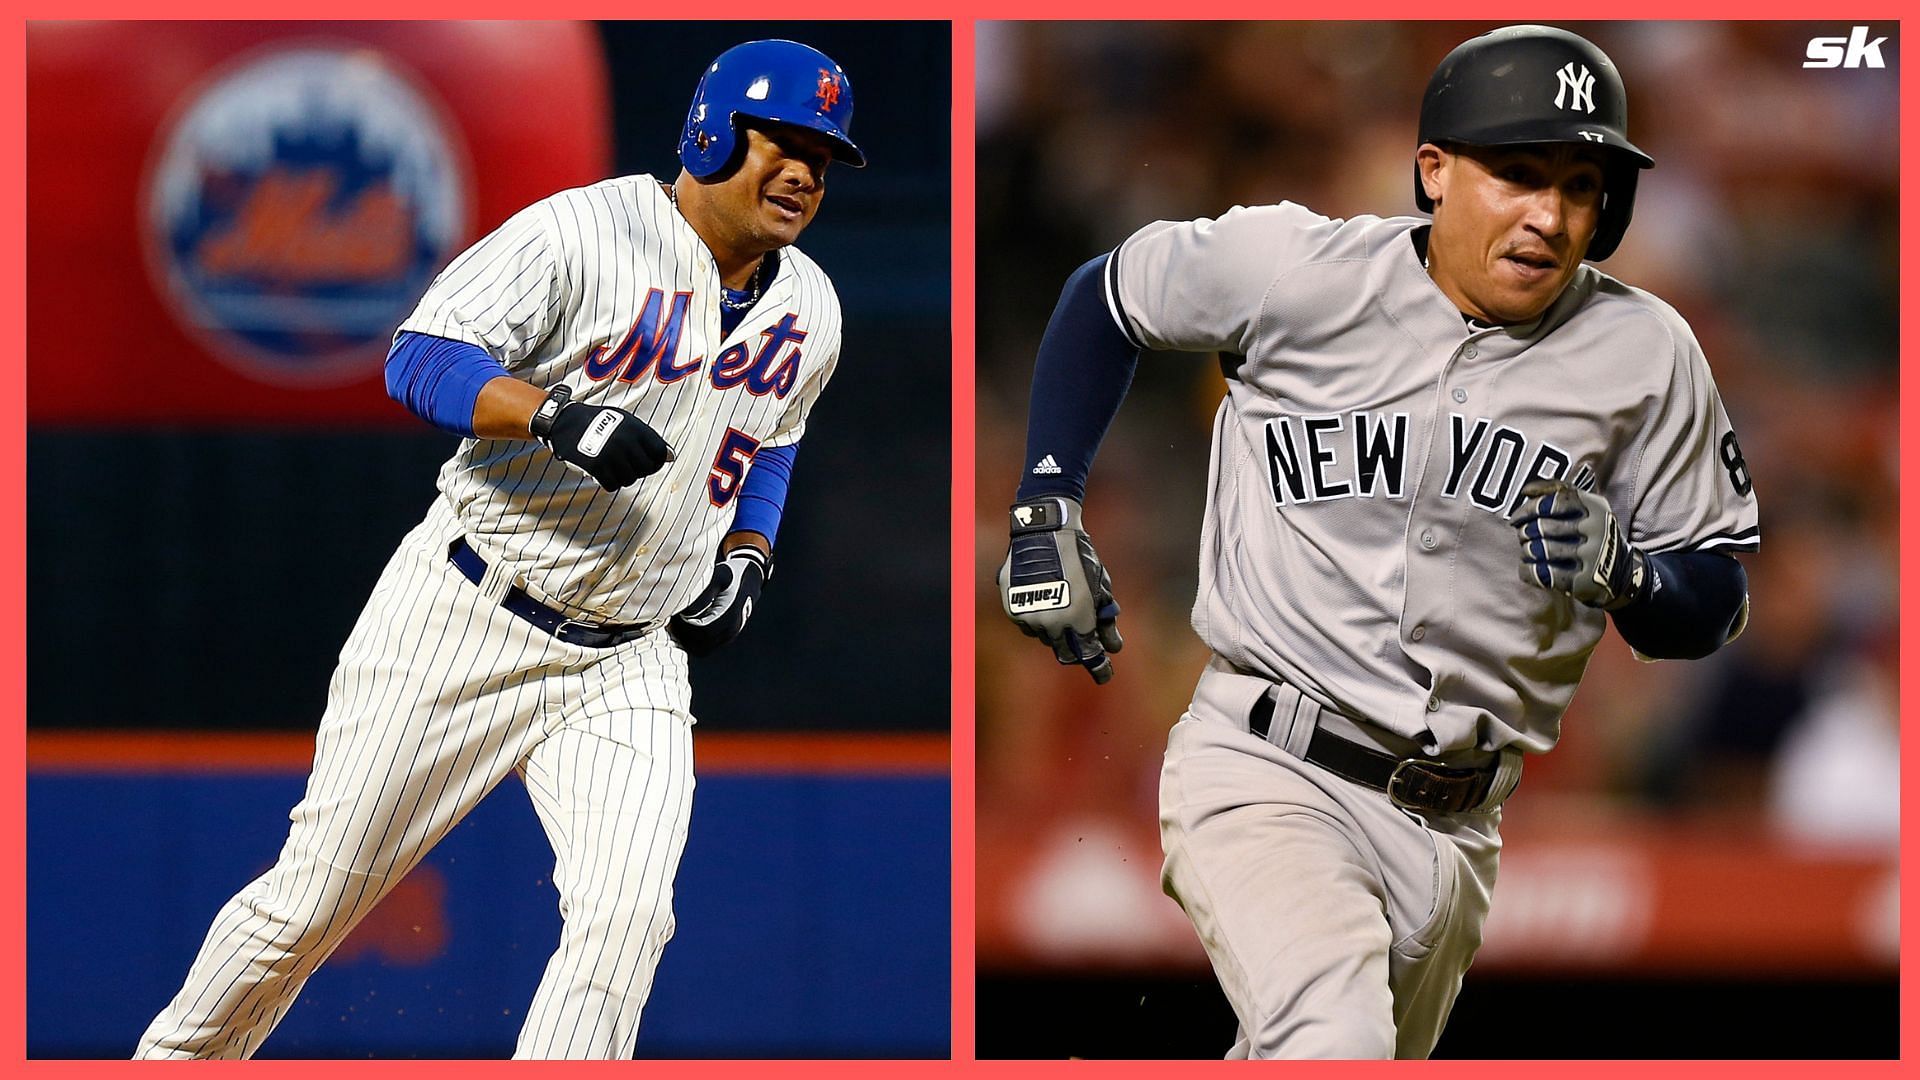 Which players have played for both Dodgers and Yankees in their